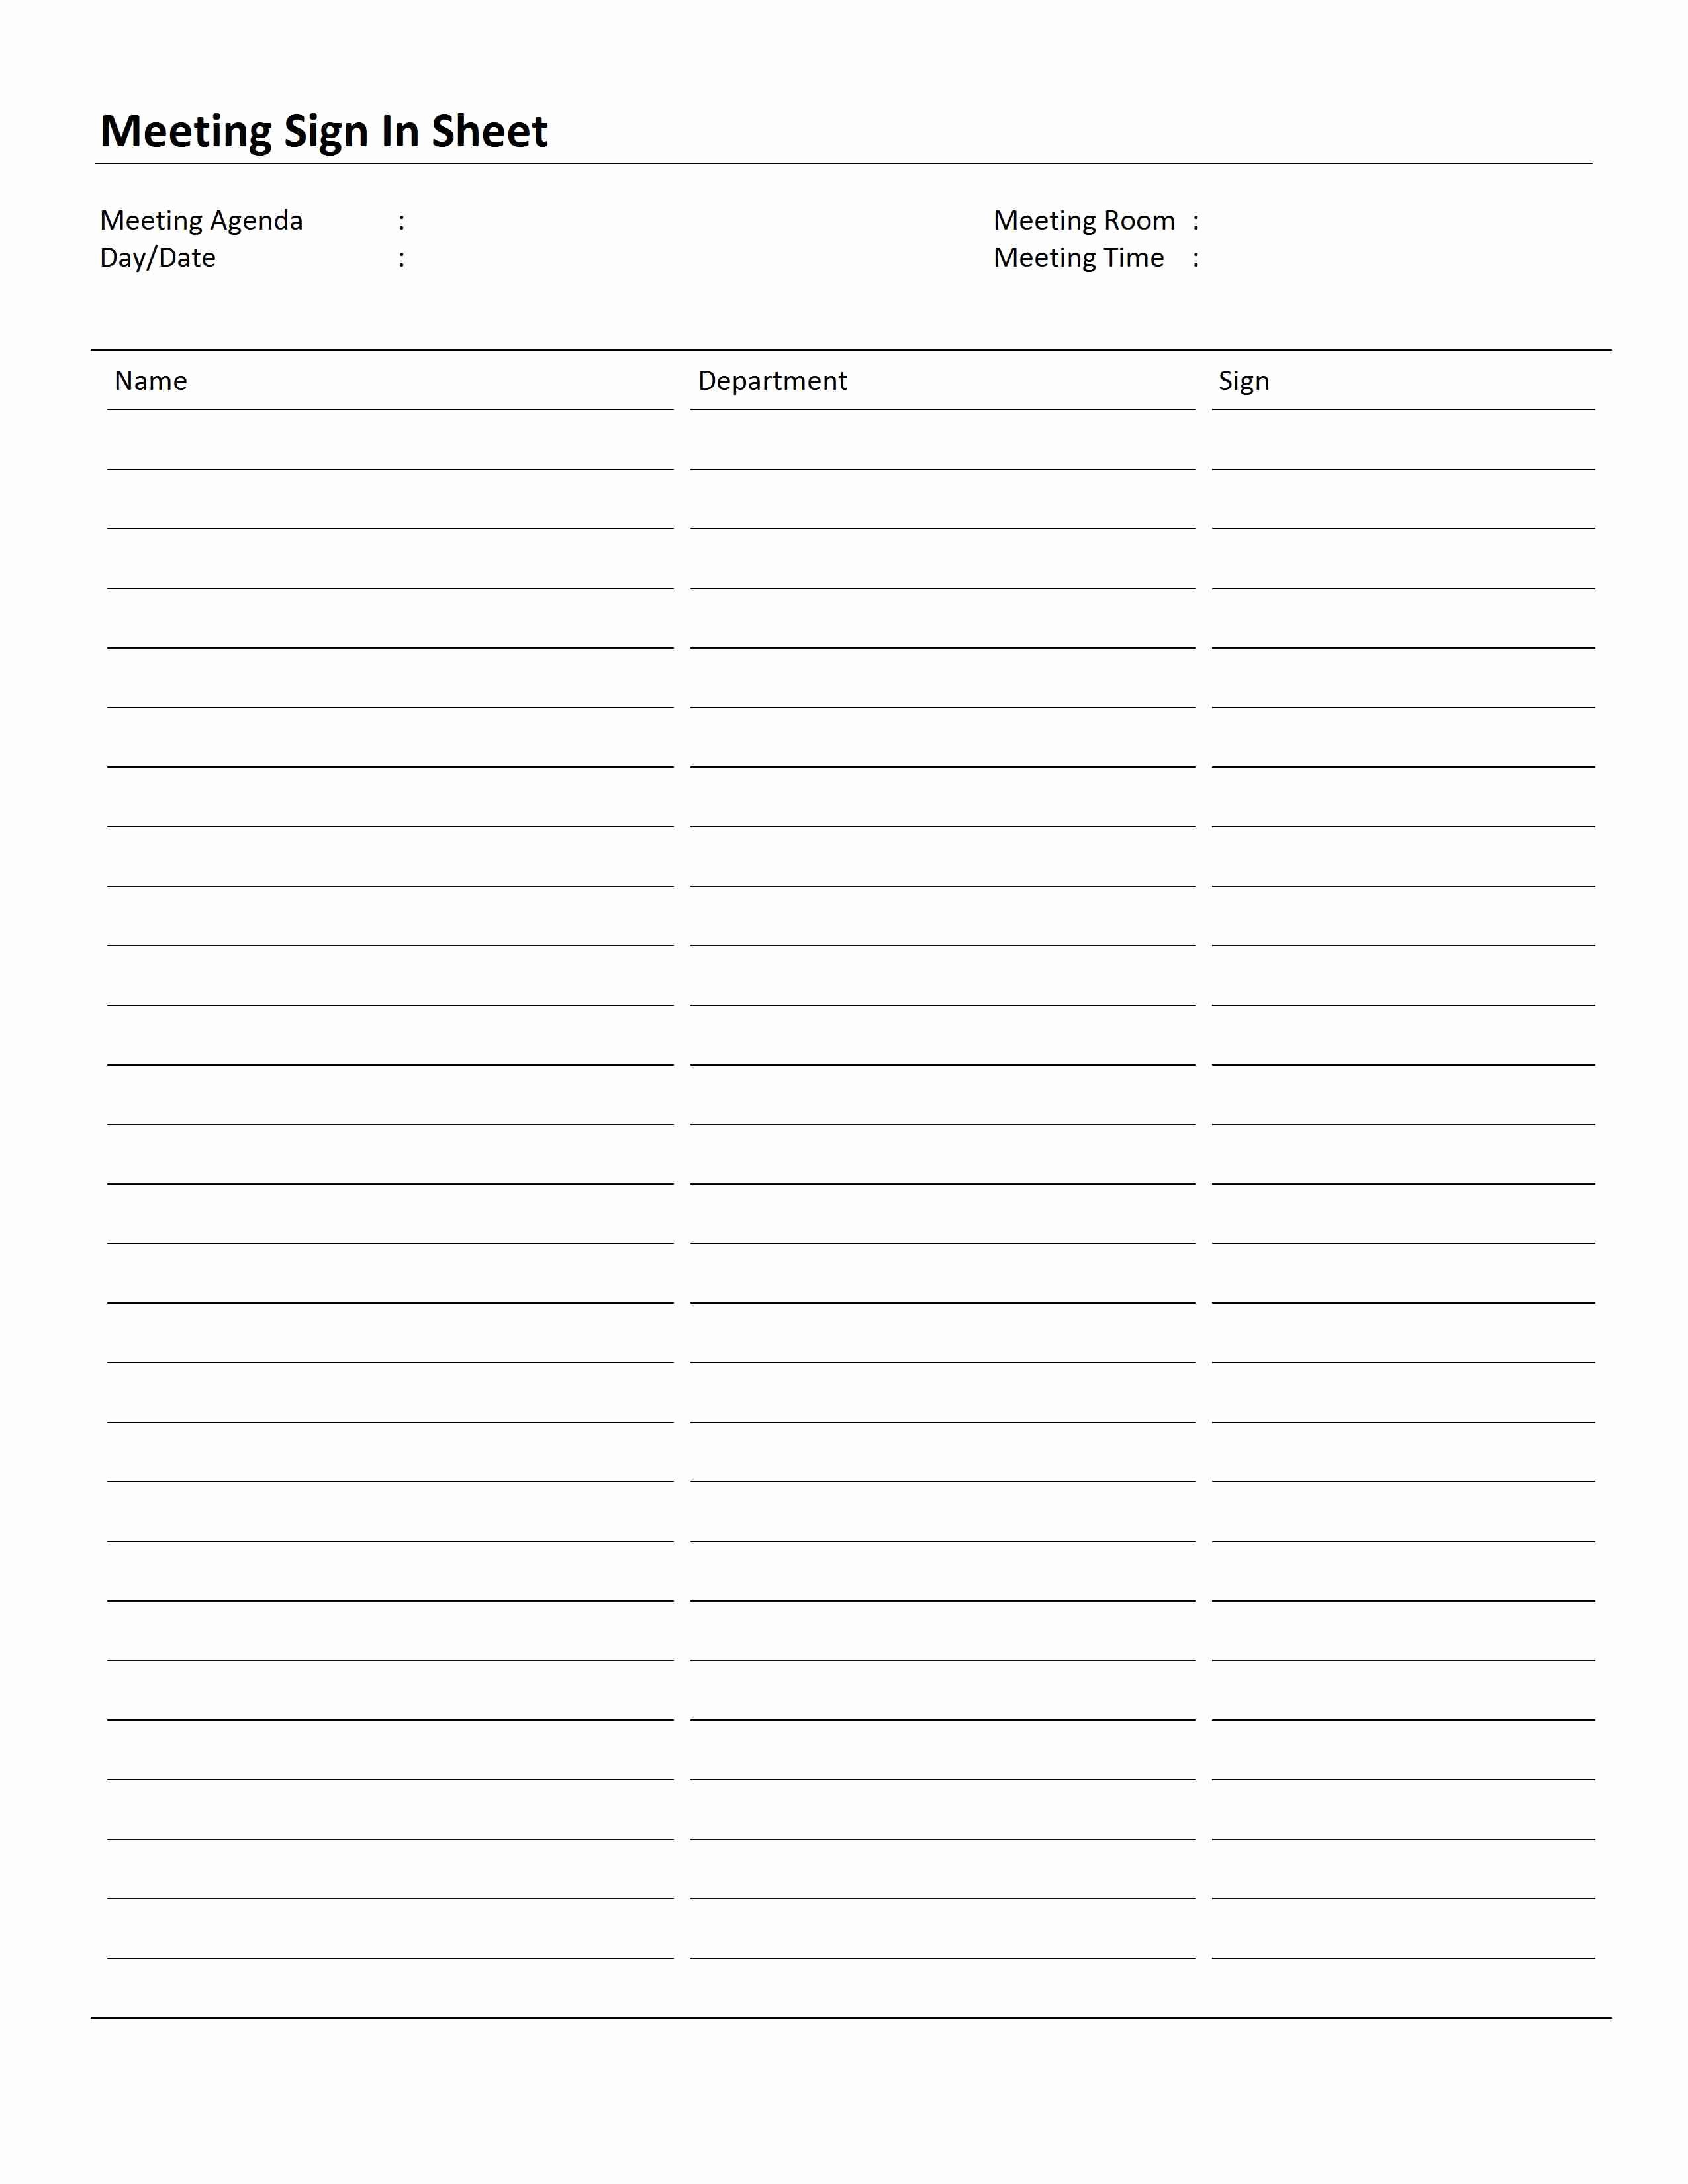 Event Sign In Sheet Template Luxury Meeting Sign In Sheet